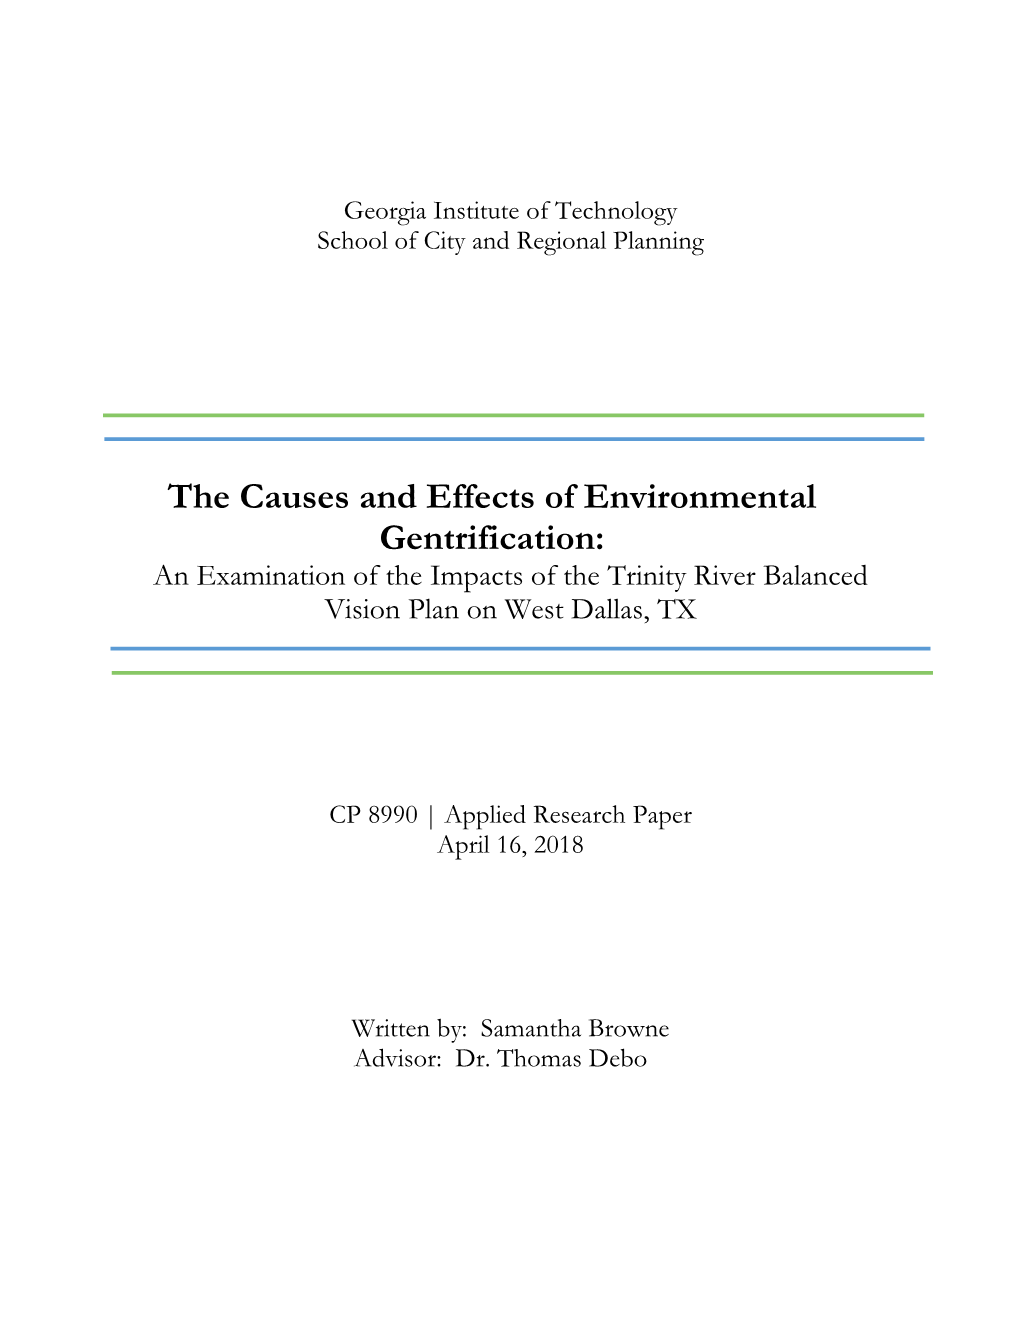 The Causes and Effects of Environmental Gentrification: an Examination of the Impacts of the Trinity River Balanced Vision Plan on West Dallas, TX